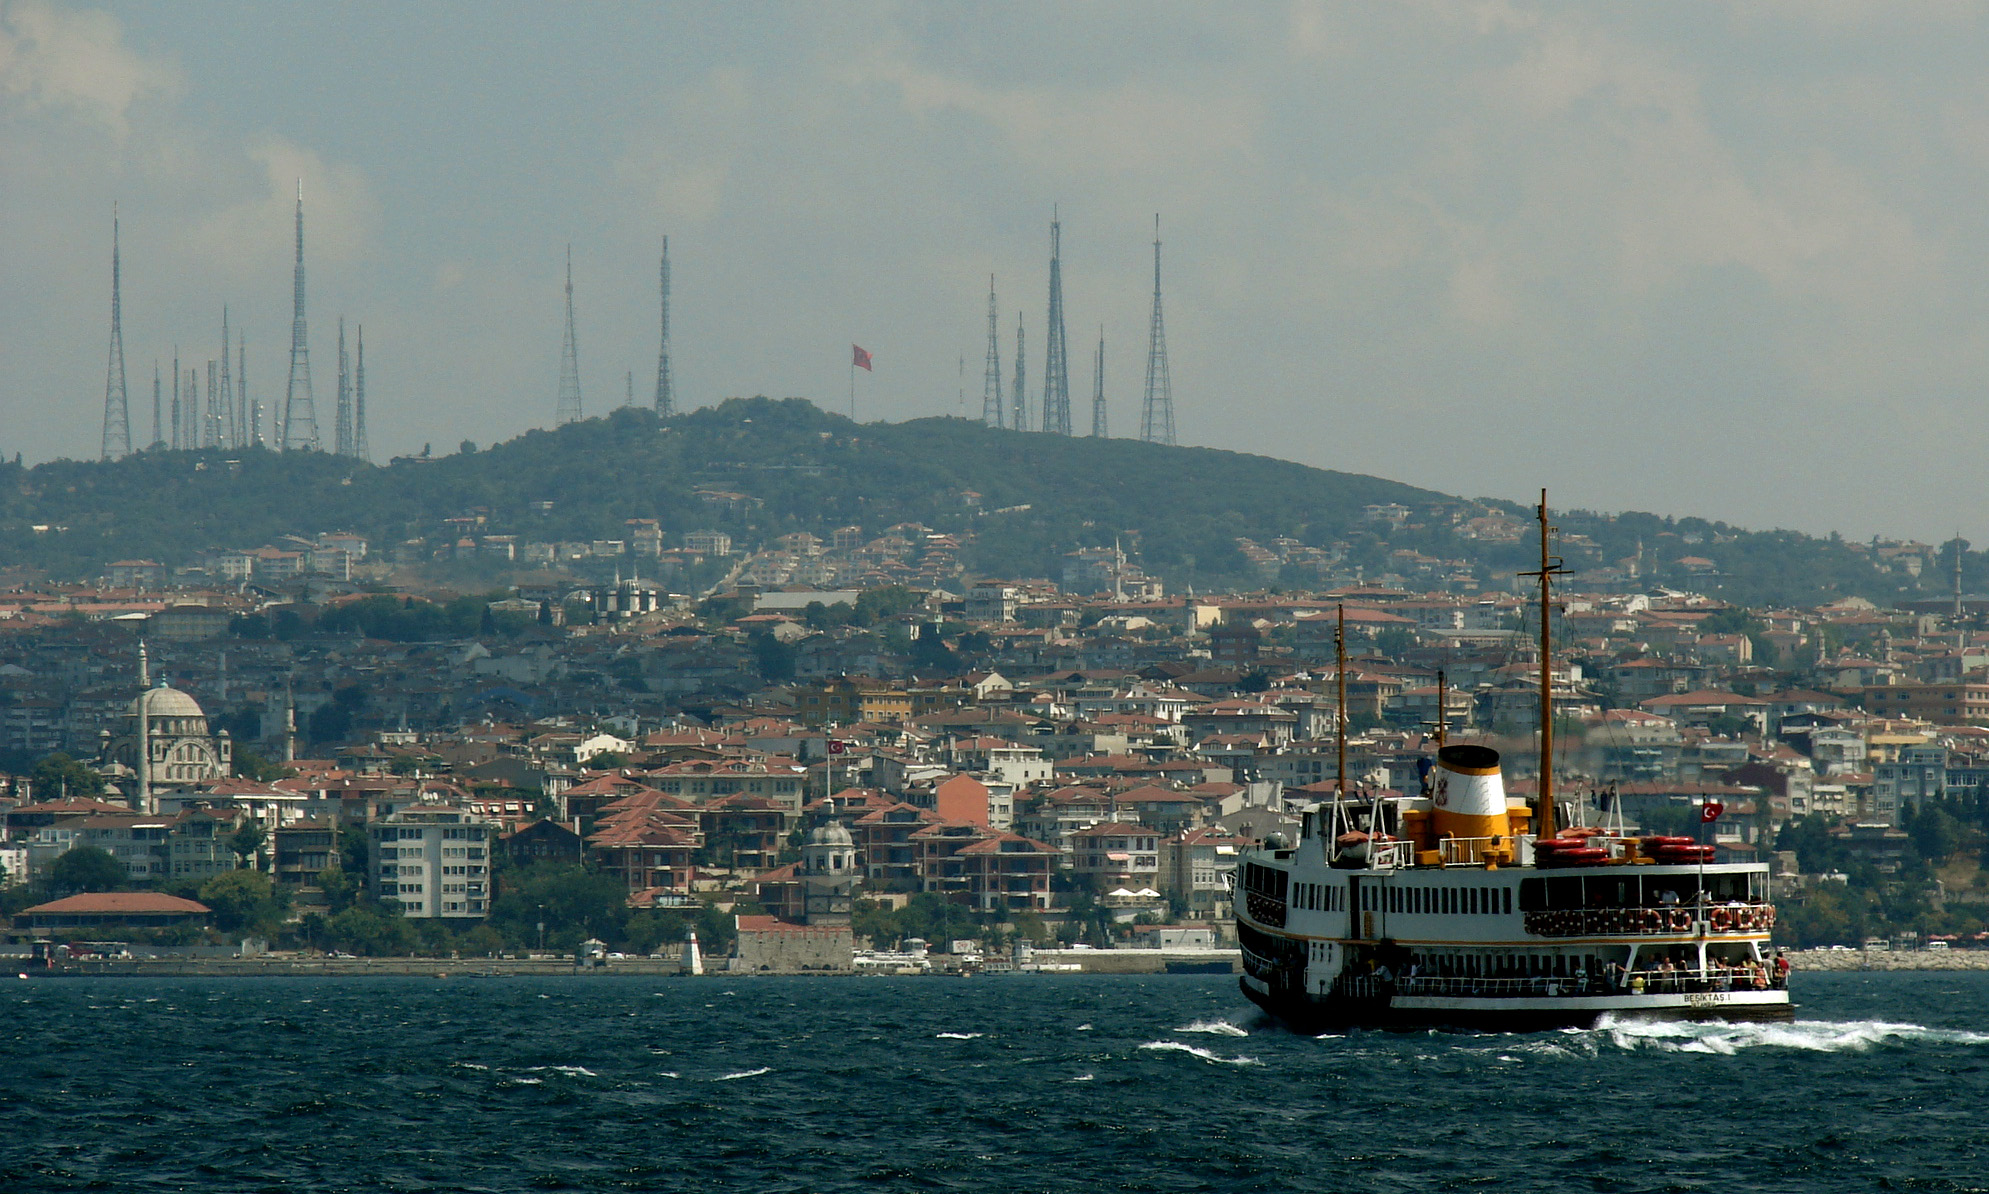 The Bosporus or Bosphorus, also known as the Istanbul Strait, is a strait that forms the boundary between the European part (Rumelia) of Turkey and its Asian part (Anatolia). The world's narrowest strait used for international navigation, it connects the Black Sea with the Sea of Marmara (which is connected by the Dardanelles to the Aegean Sea, and thereby to the Mediterranean Sea). It is approximately 30 km long, with a maximum width of 3,700 metres at the northern entrance, and a minimum width of 700 metres between Kandilli and Aşiyan; and 750 metres between Anadoluhisarı and Rumelihisarı. The depth varies from 36 to 124 metres in midstream. The shores of the strait are heavily populated as the city of Istanbul (with a metropolitan area in excess of 11 million inhabitants) straddles it. Flickr - Senol Demir.